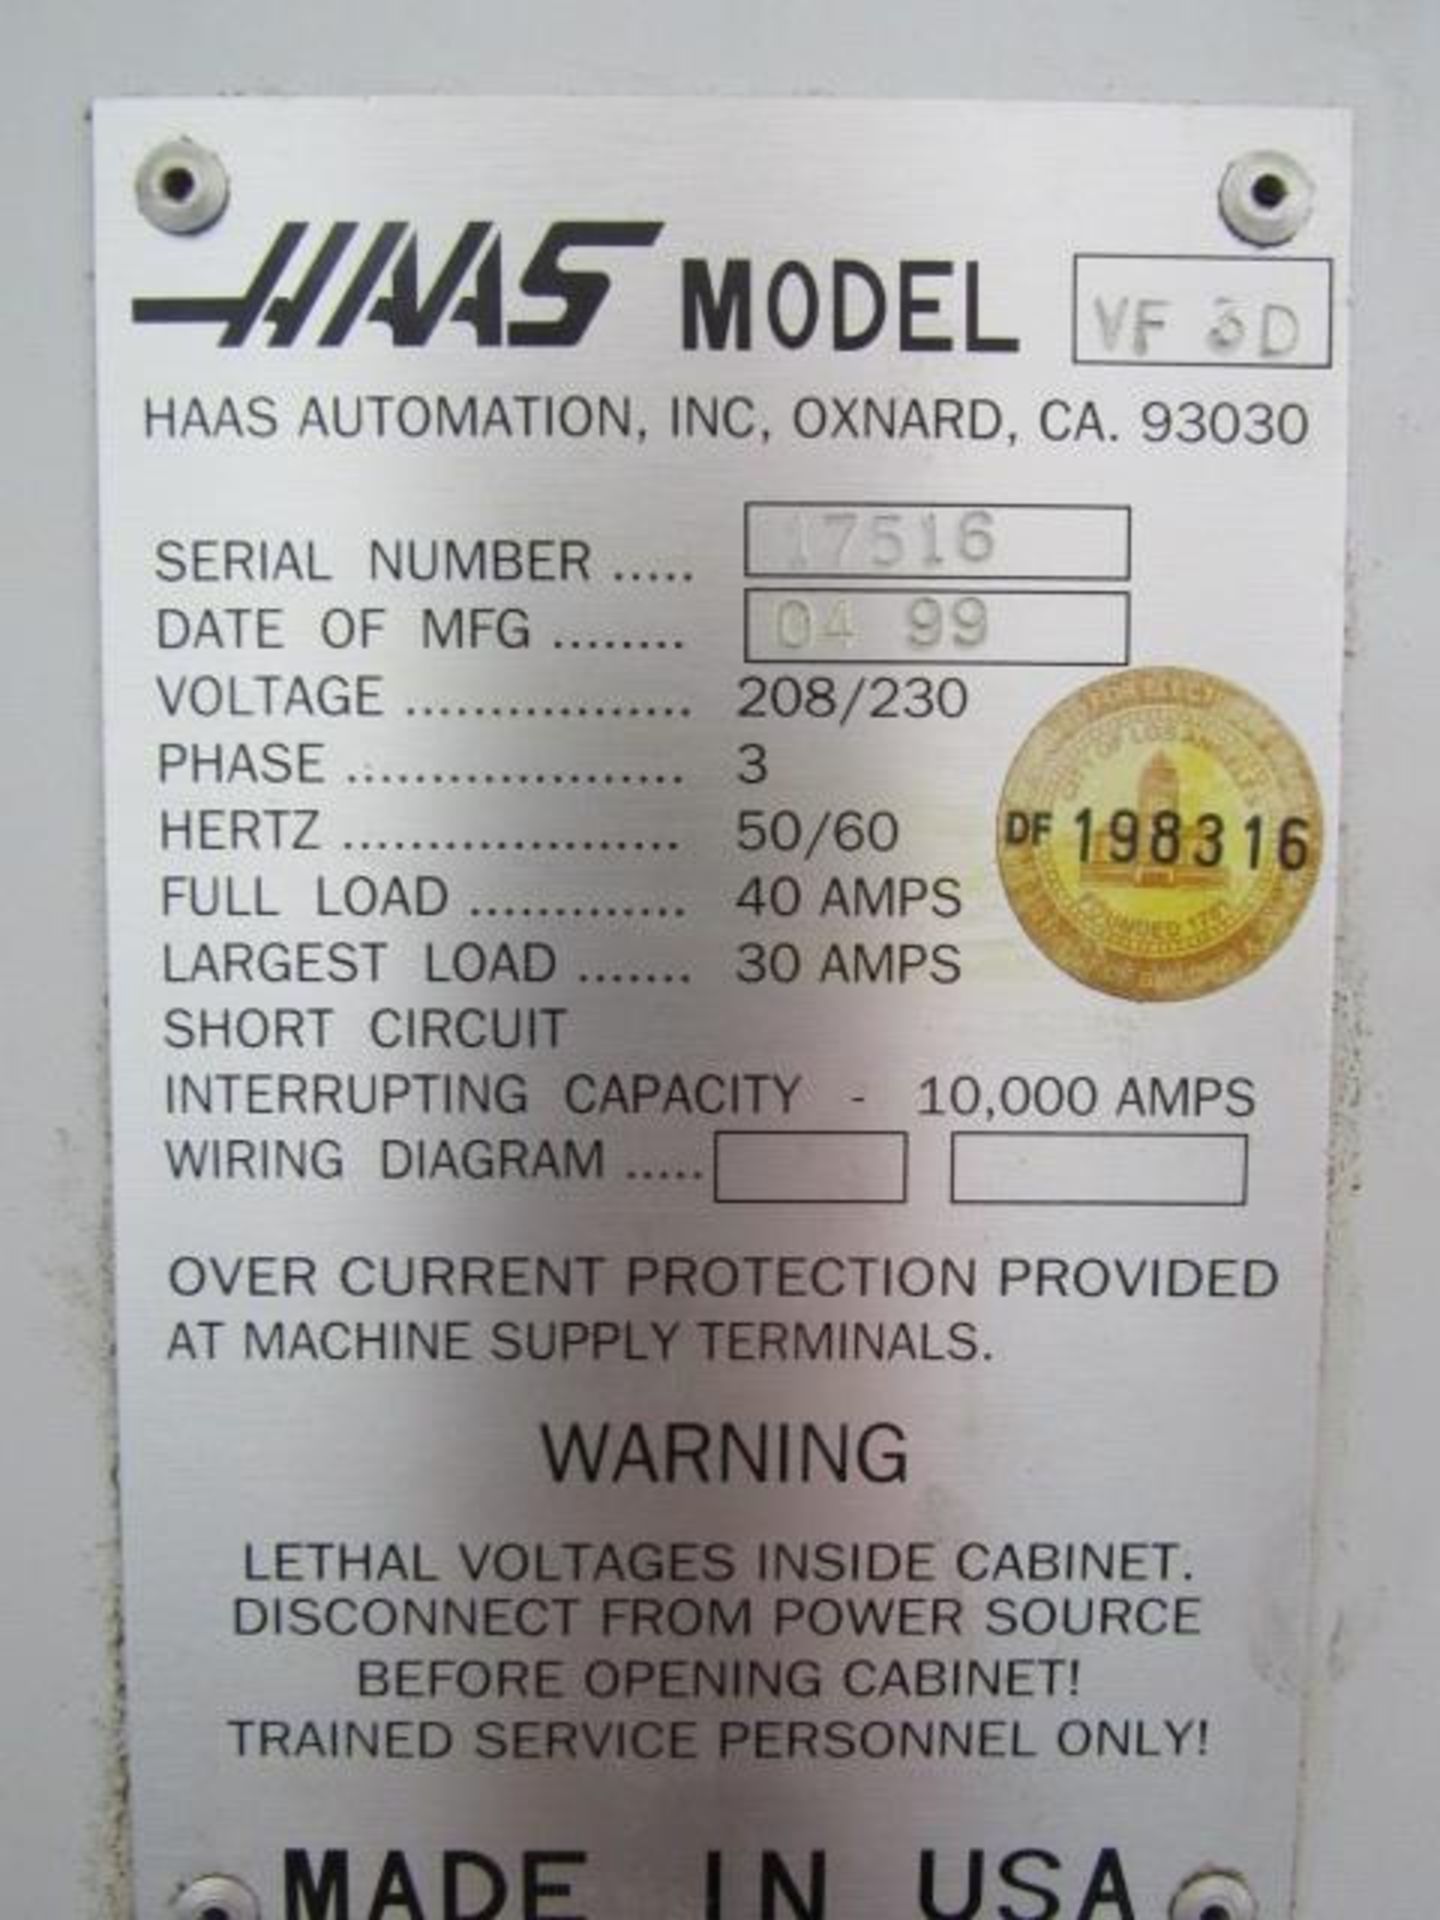 Haas VF-3D 4/5-Axis CNC Vertical Machining Center - Image 7 of 7